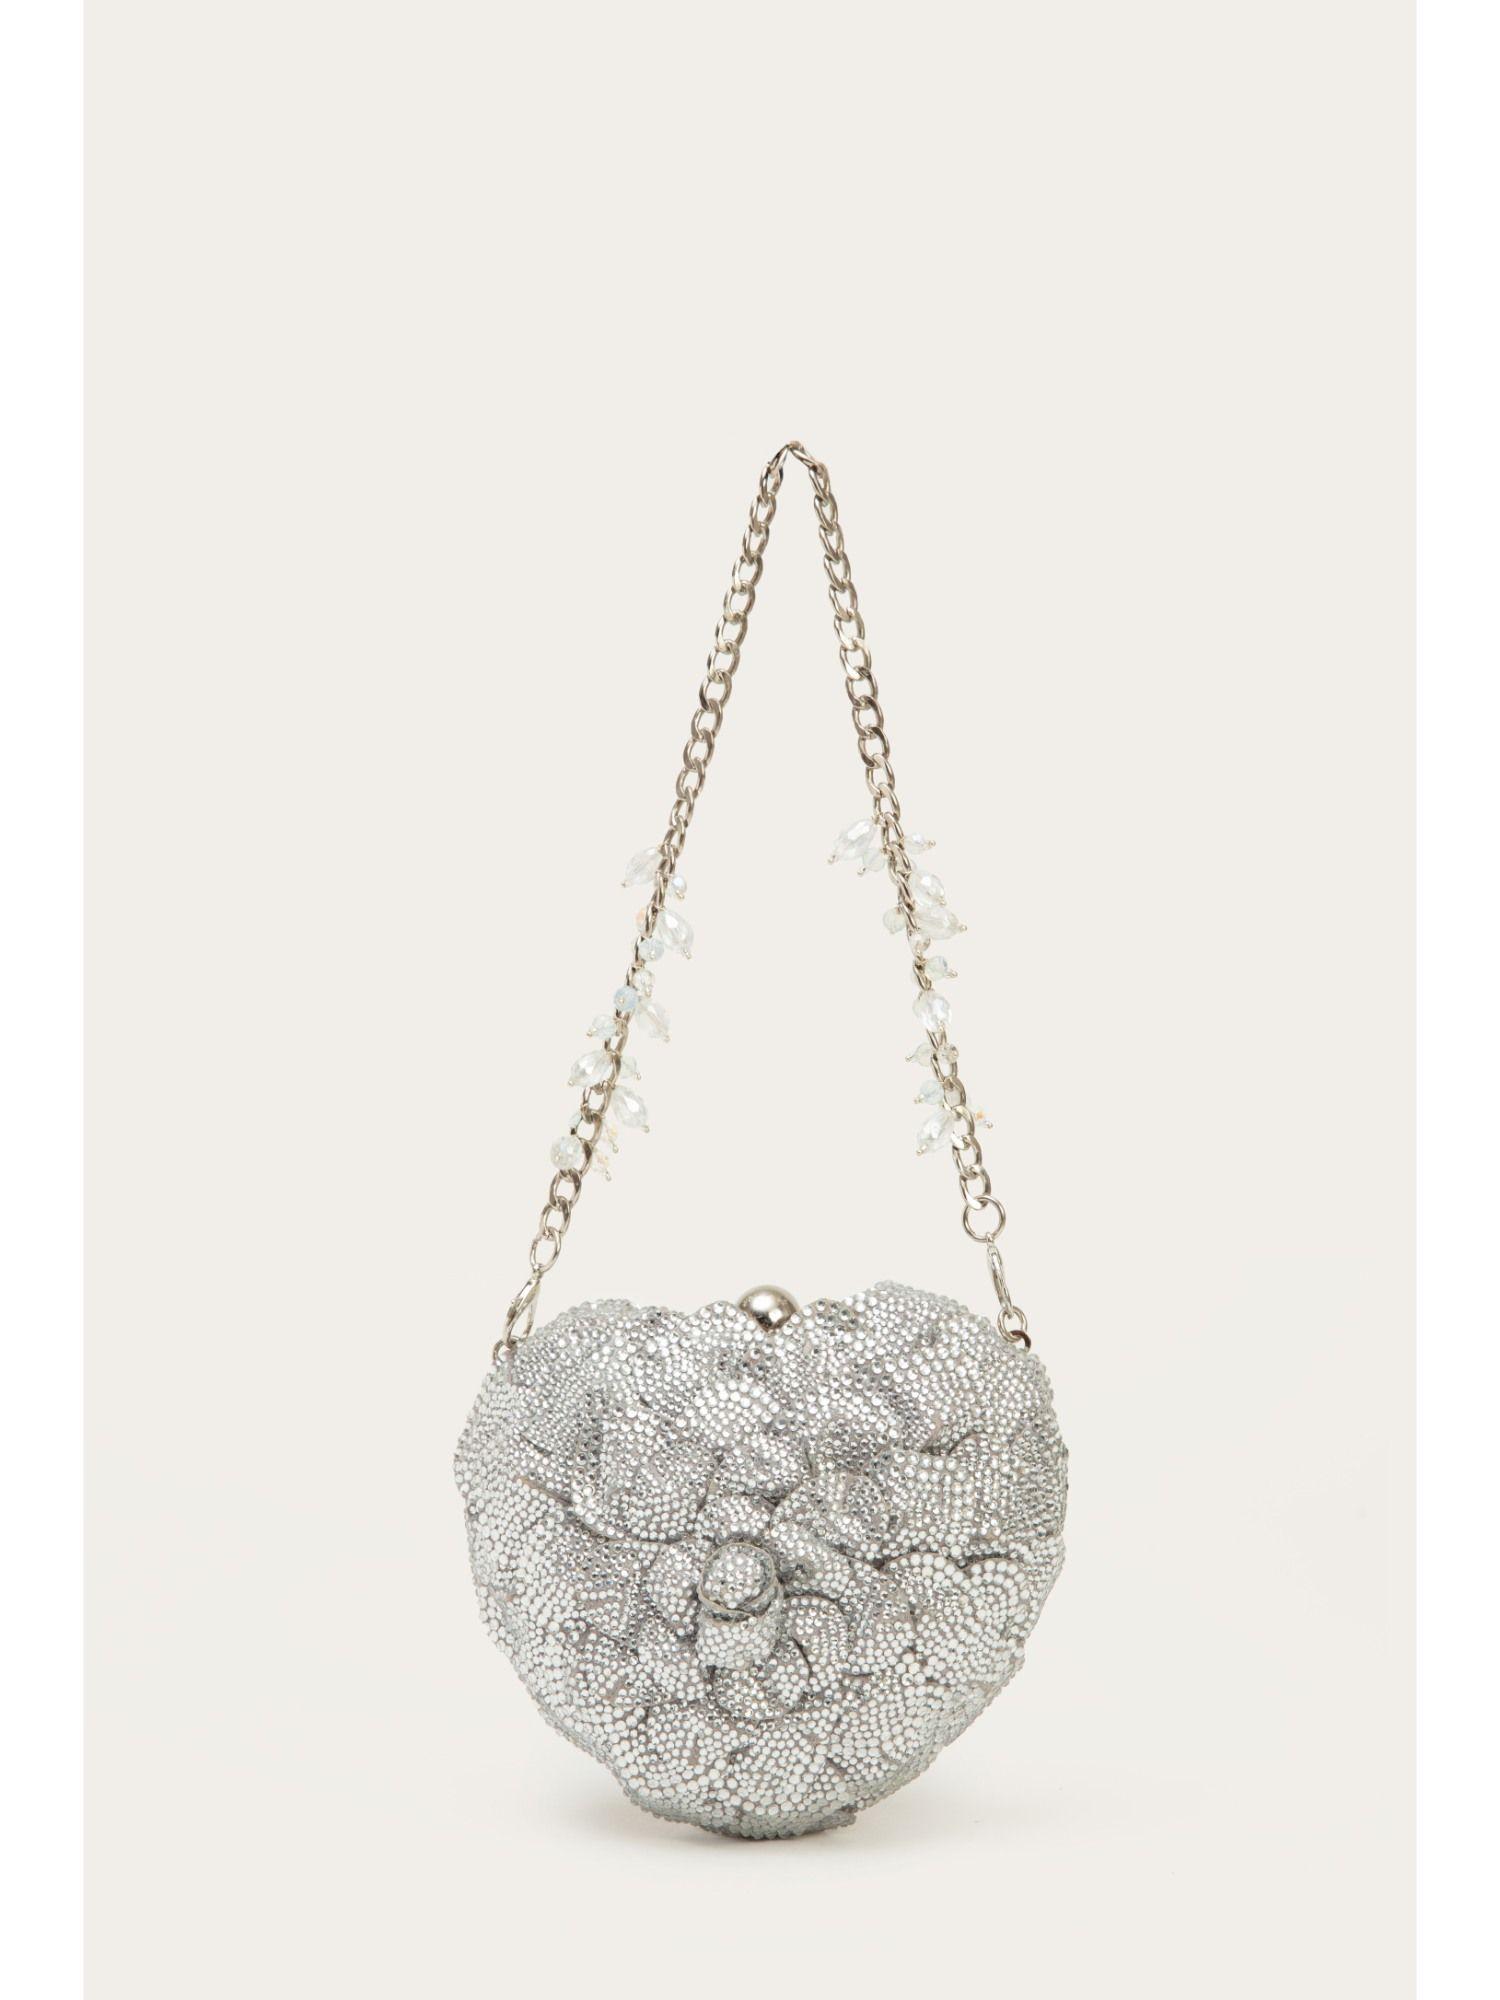 isa crysta silver embellished clutch